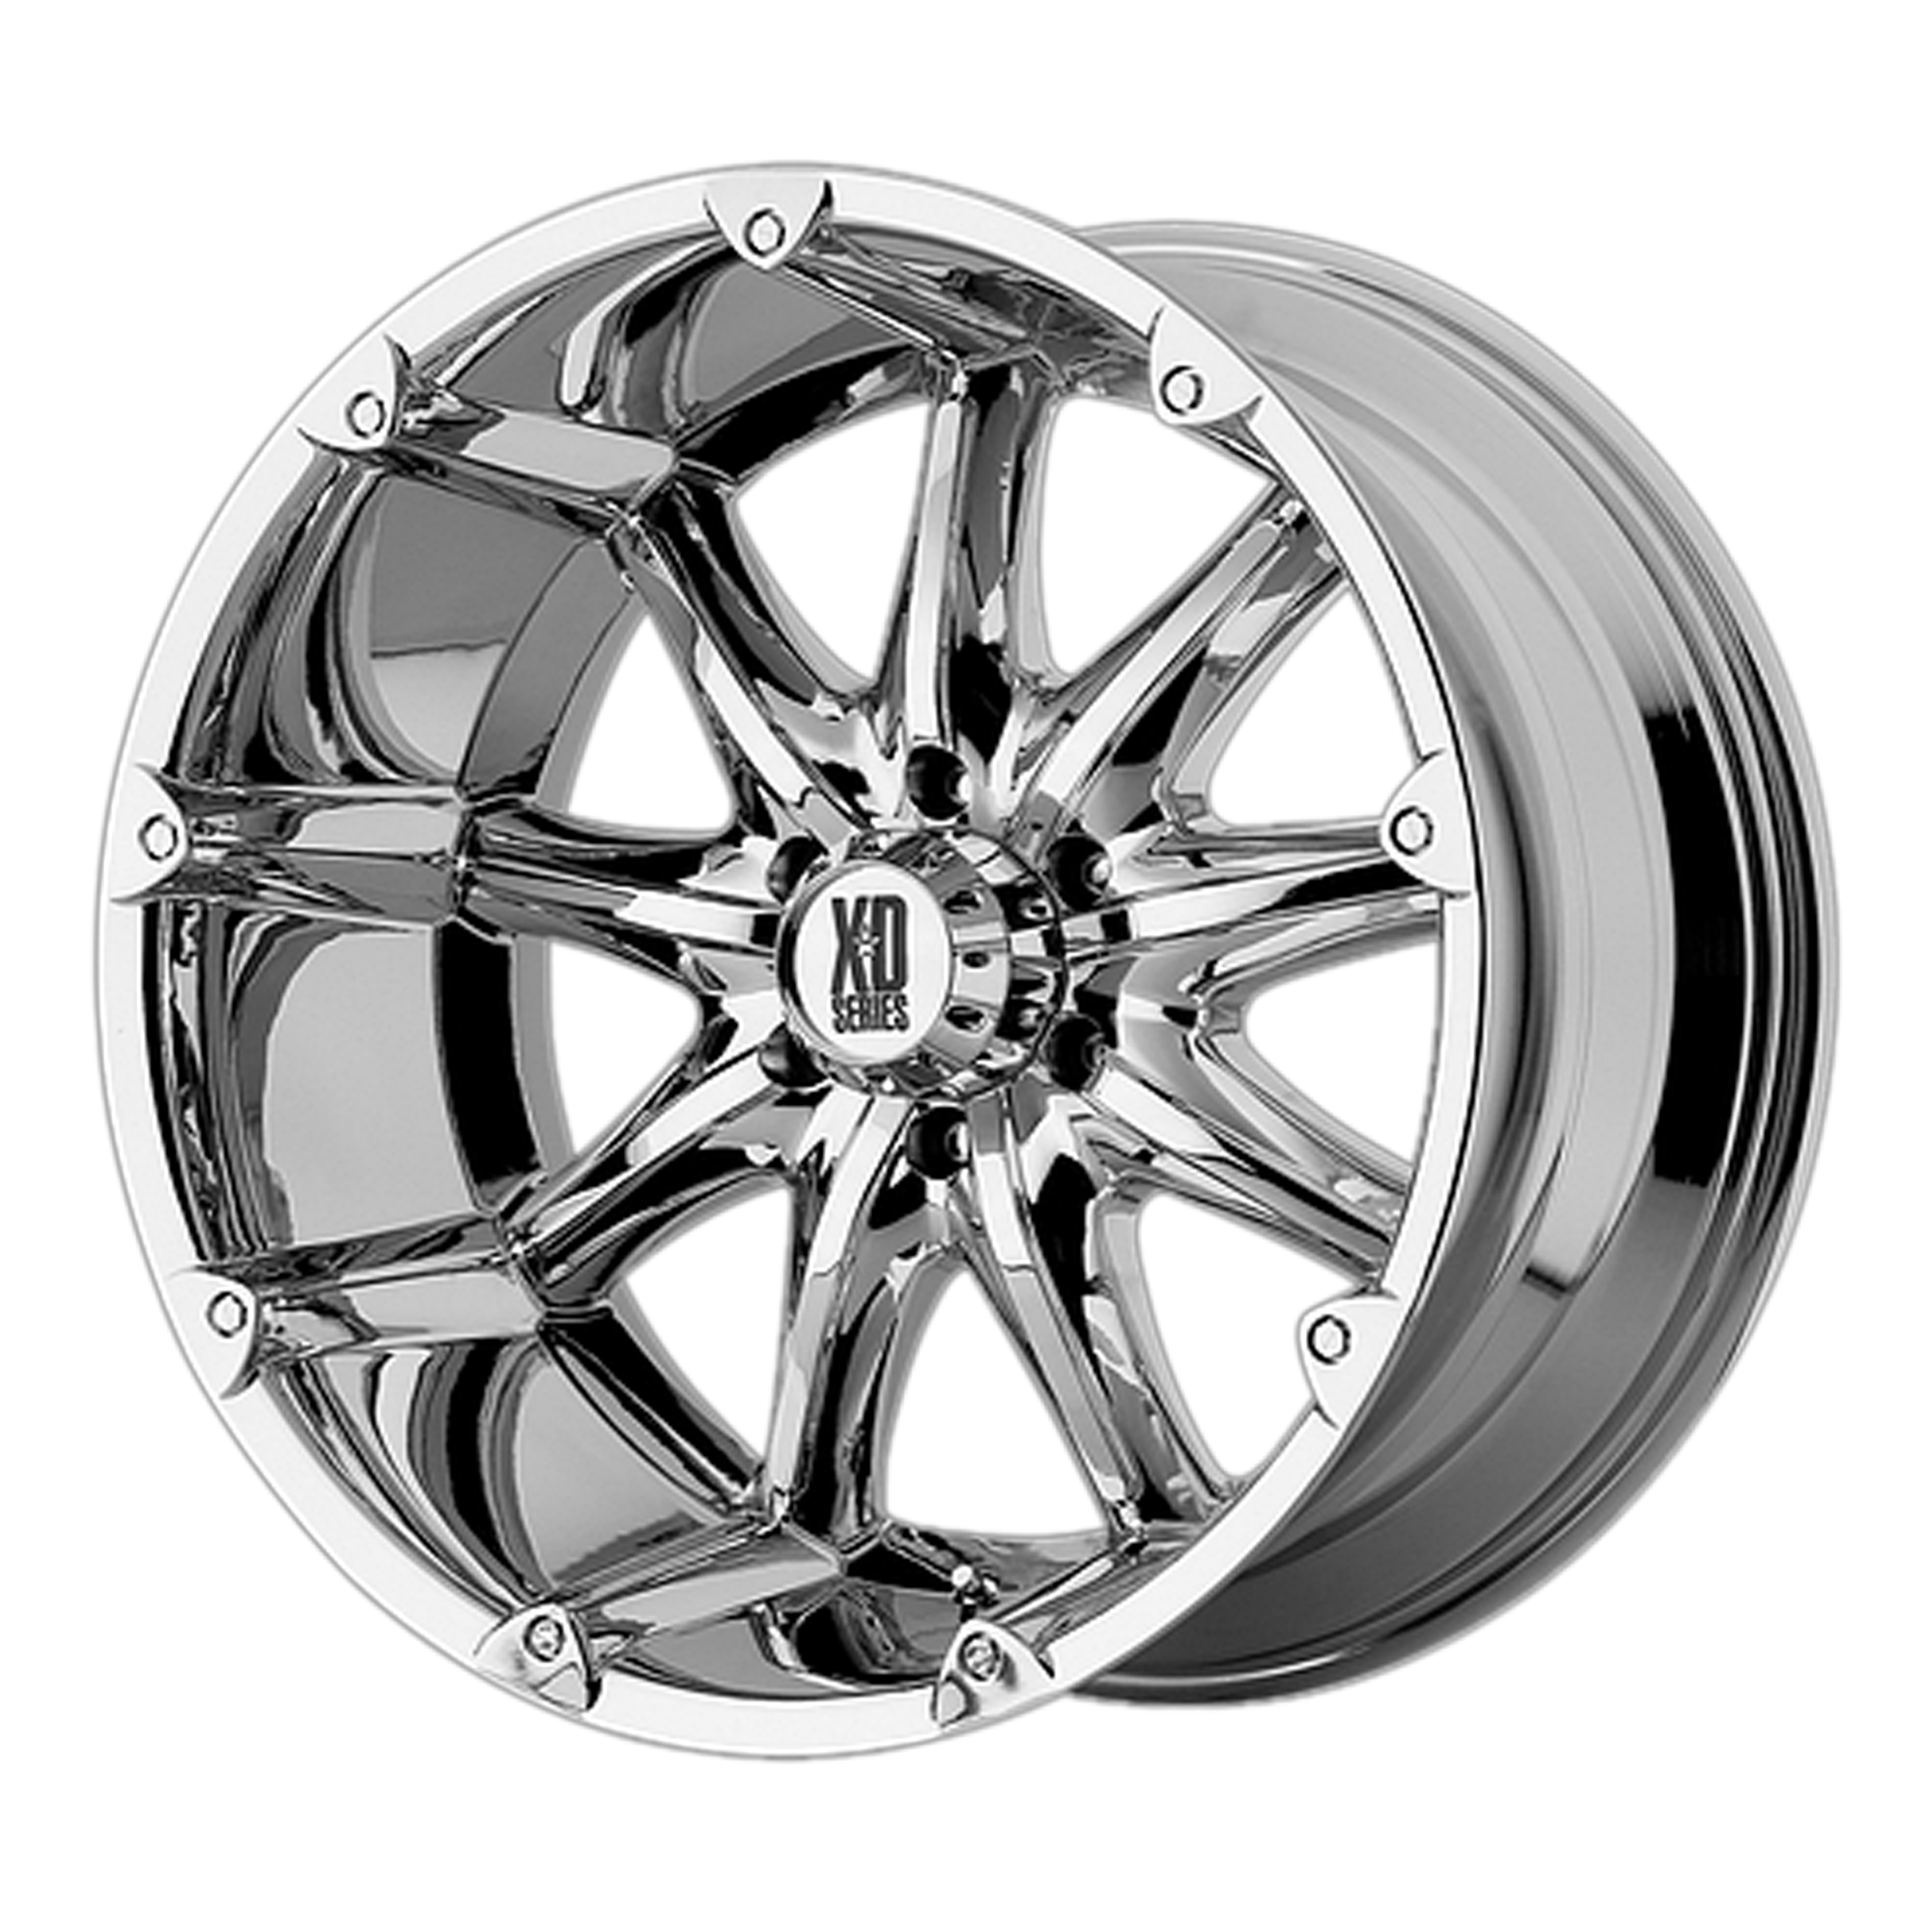 BADLANDS 18x9 8x170.00 CHROME (-12 mm) - Tires and Engine Performance